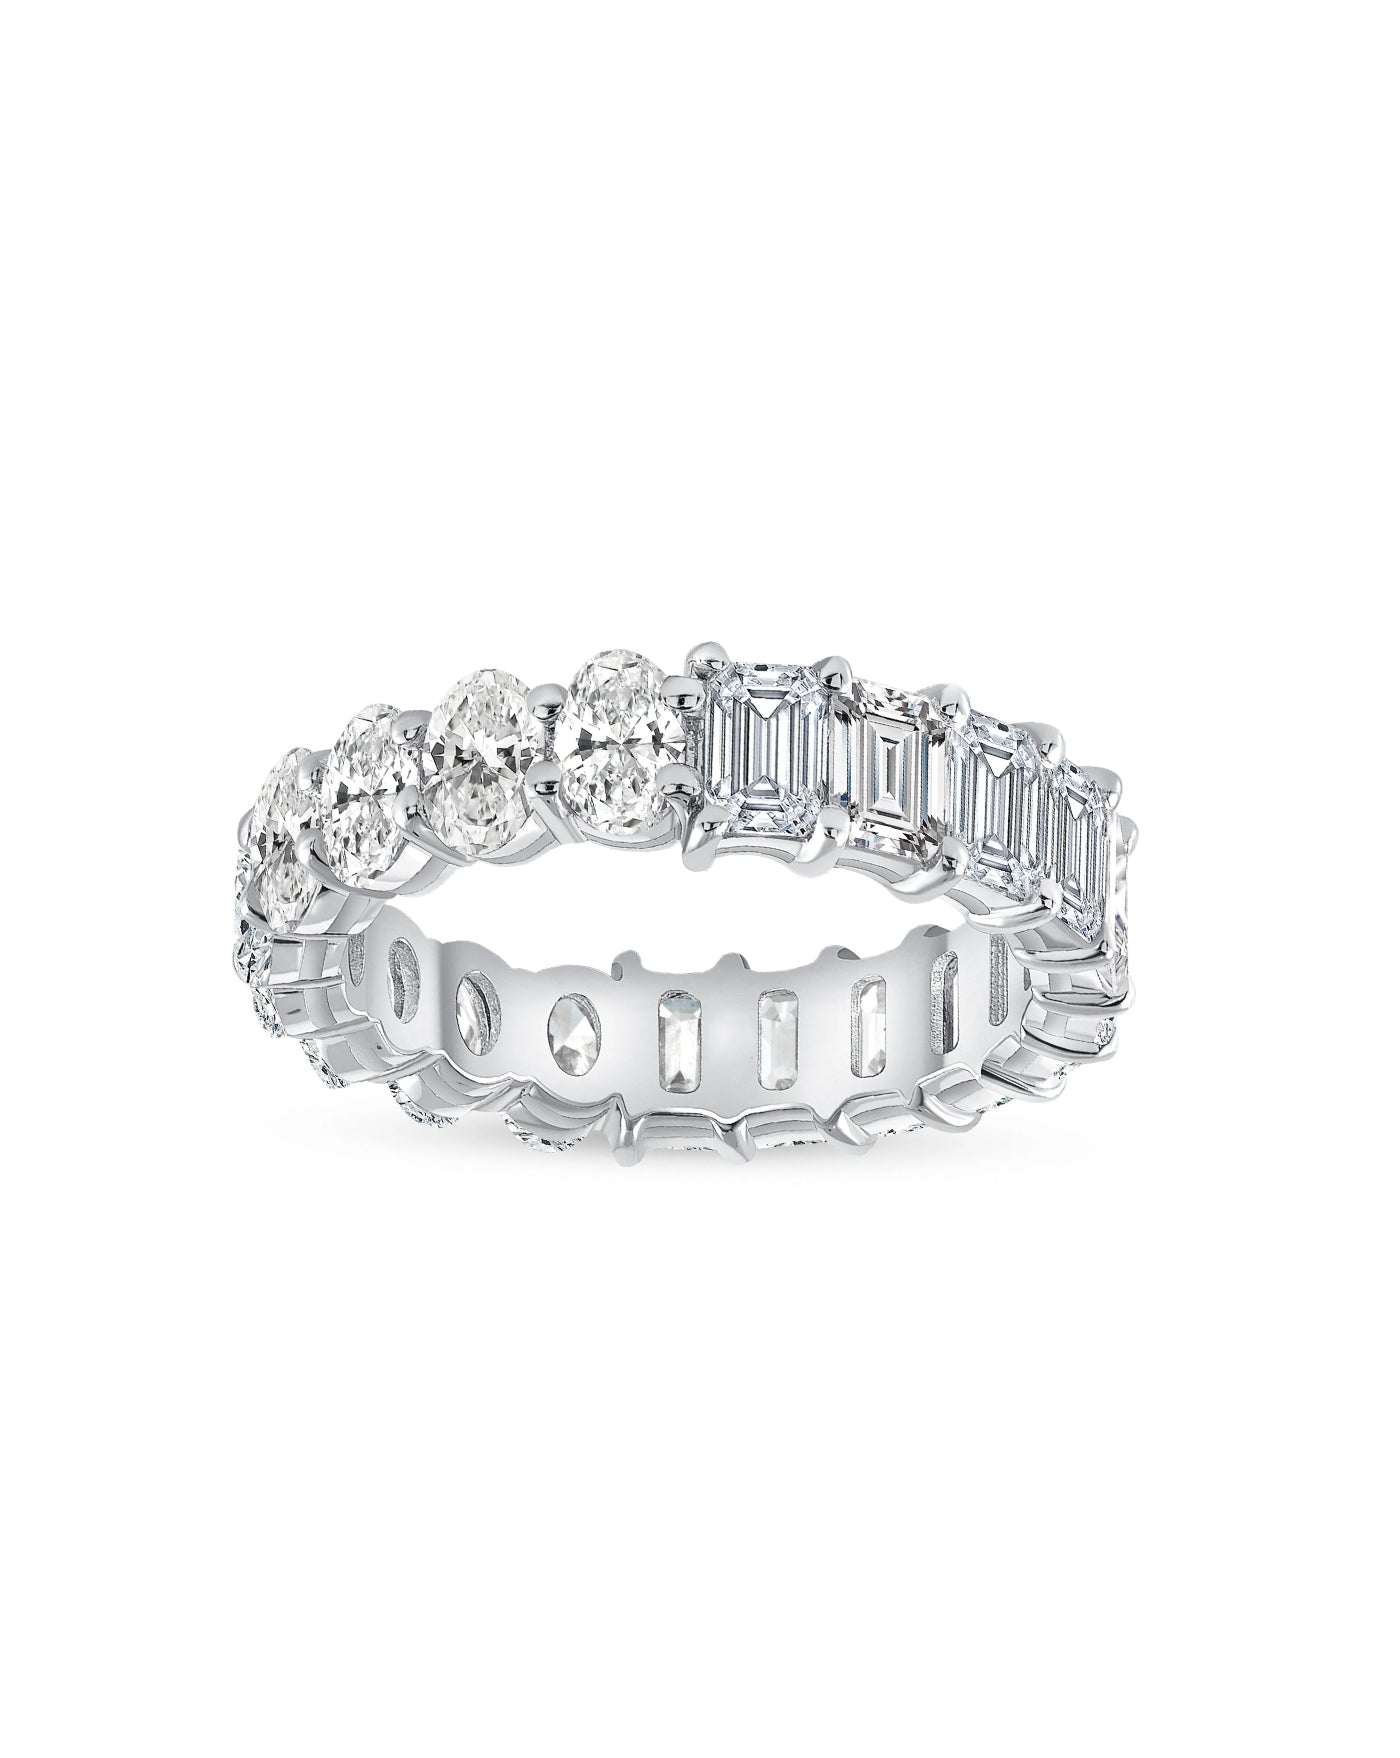 Half and Half Eternity Band Ring | Oval and Emerald Cut 6ct LAB Diamond